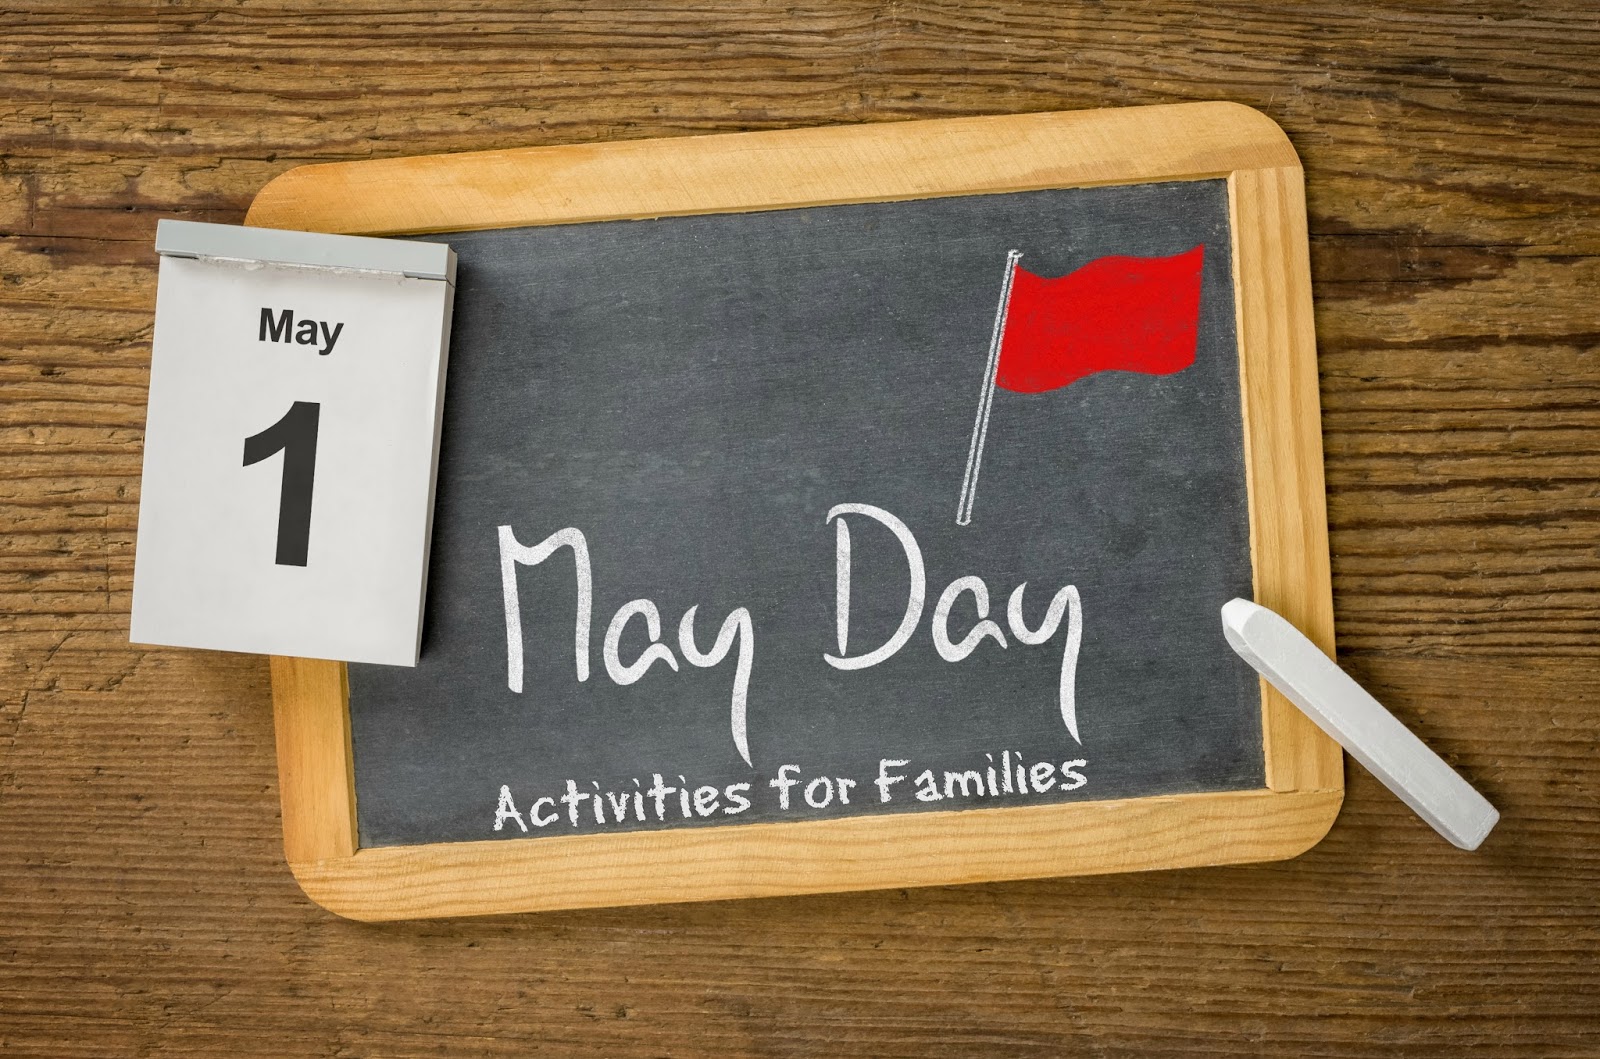 May Day (Long weekend) activities for the families